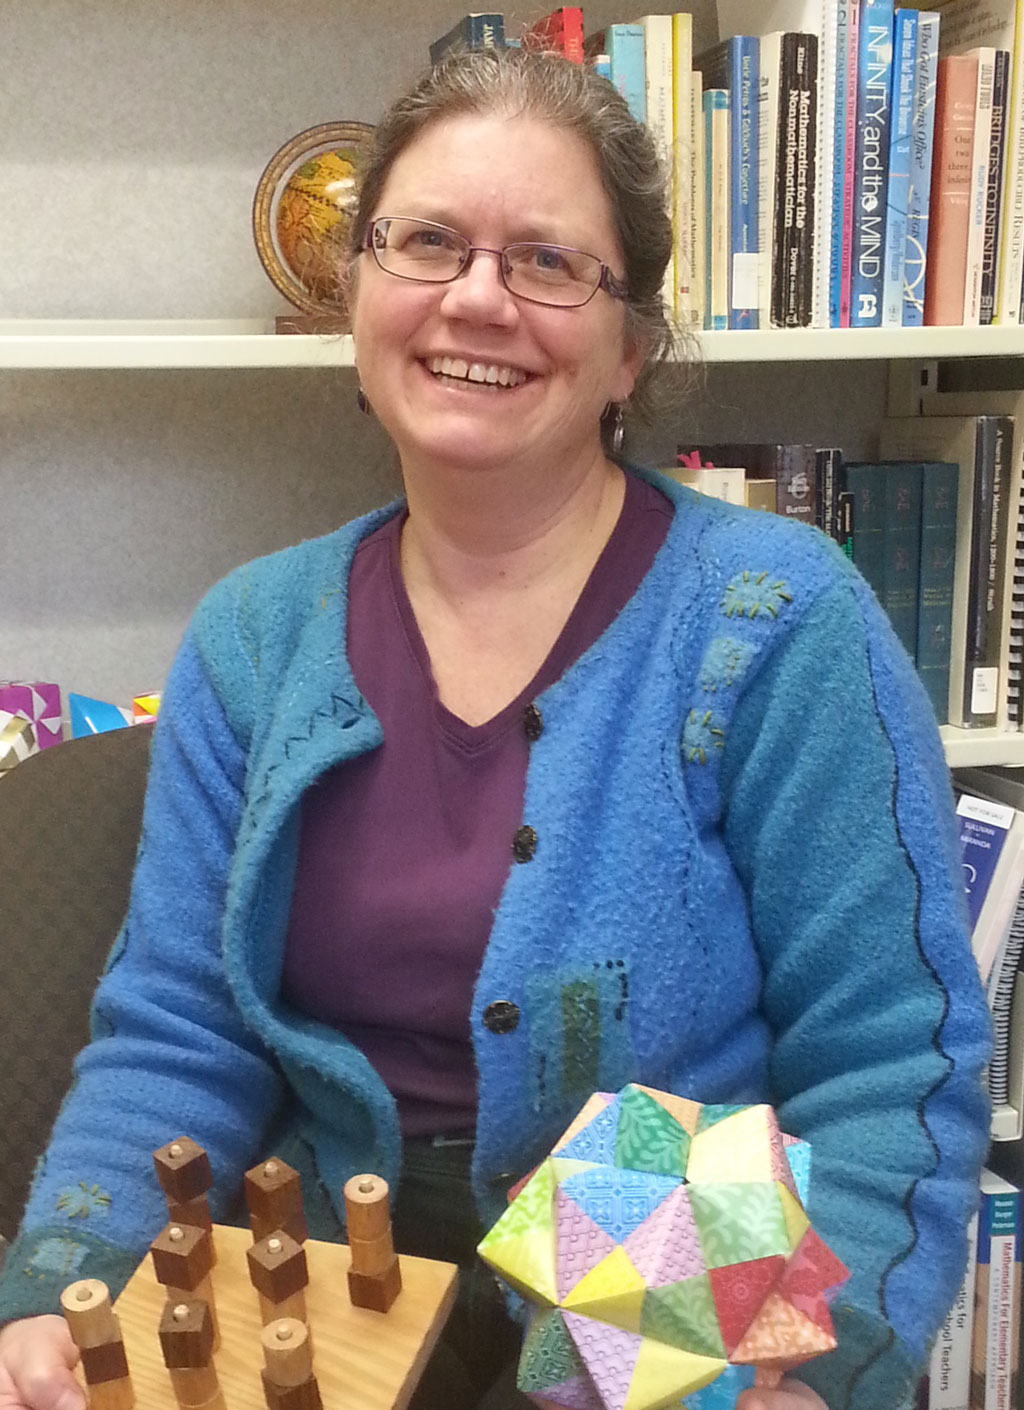 Games, logic, and a passion for puzzles:  Susan Milner on how she teaches math